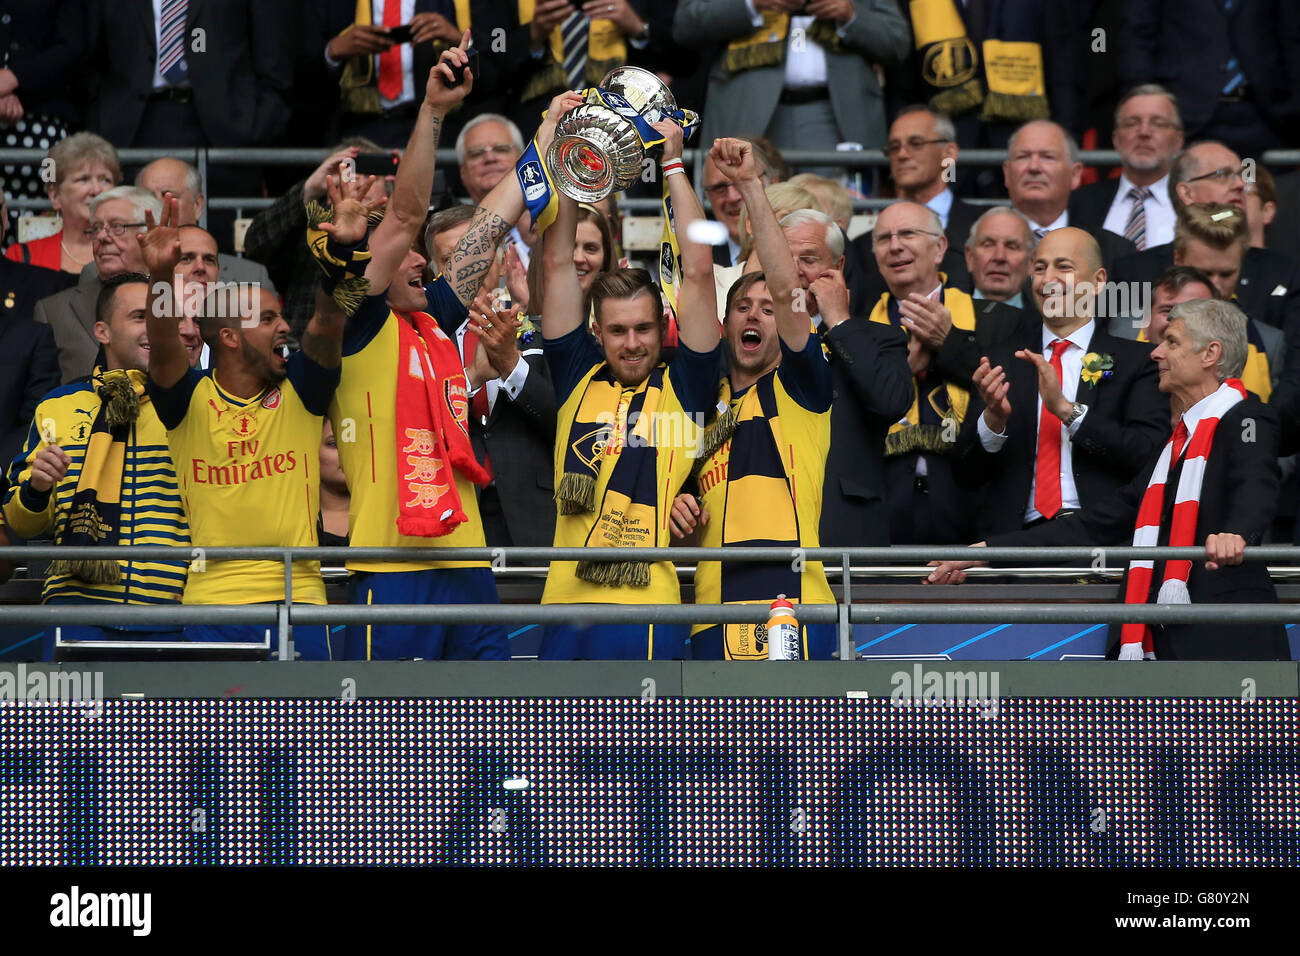 Arsenal's Aaron Ramsey (centre) and Nacho Monreal (centre right) celebrate with the trophy on the Wembley balcony following their victory in the FA Cup Final at Wembley Stadium, London. PRESS ASSOCIATION Photo. Picture date: Saturday May 30, 2015. See PA Story SOCCER FA Cup. Photo credit should read: Nick Potts/PA Wire. RESTRICTIONS: Maximum 45 images during a match. No video emulation or promotion as 'live'. No use in games, competitions, merchandise, betting or single club/player services. No use with unofficial audio, video, data, fixture Stock Photo